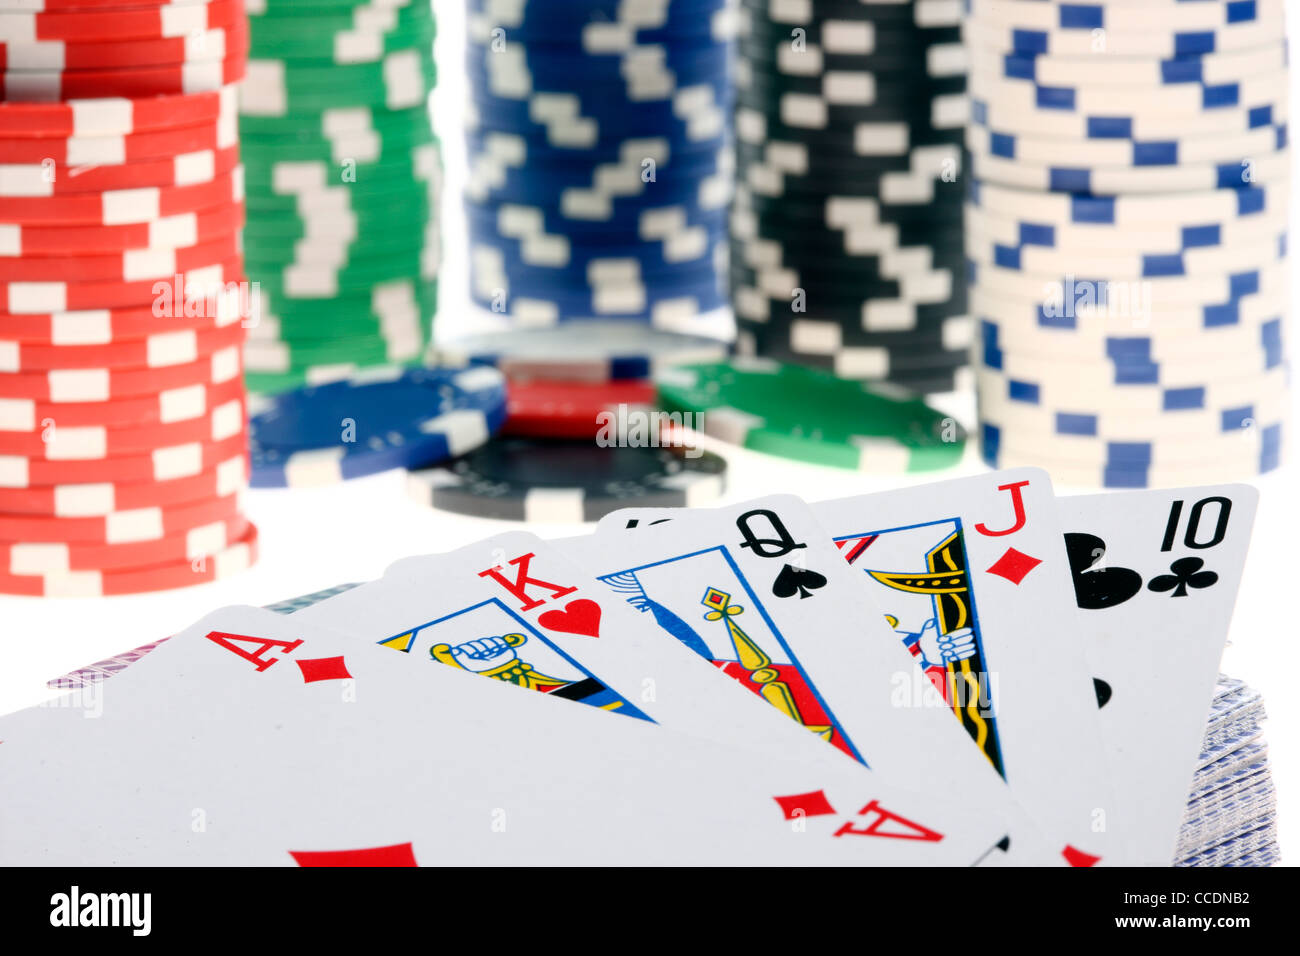 Poker game, different gaming tokes, chips, of different values. Playing cards. Stock Photo